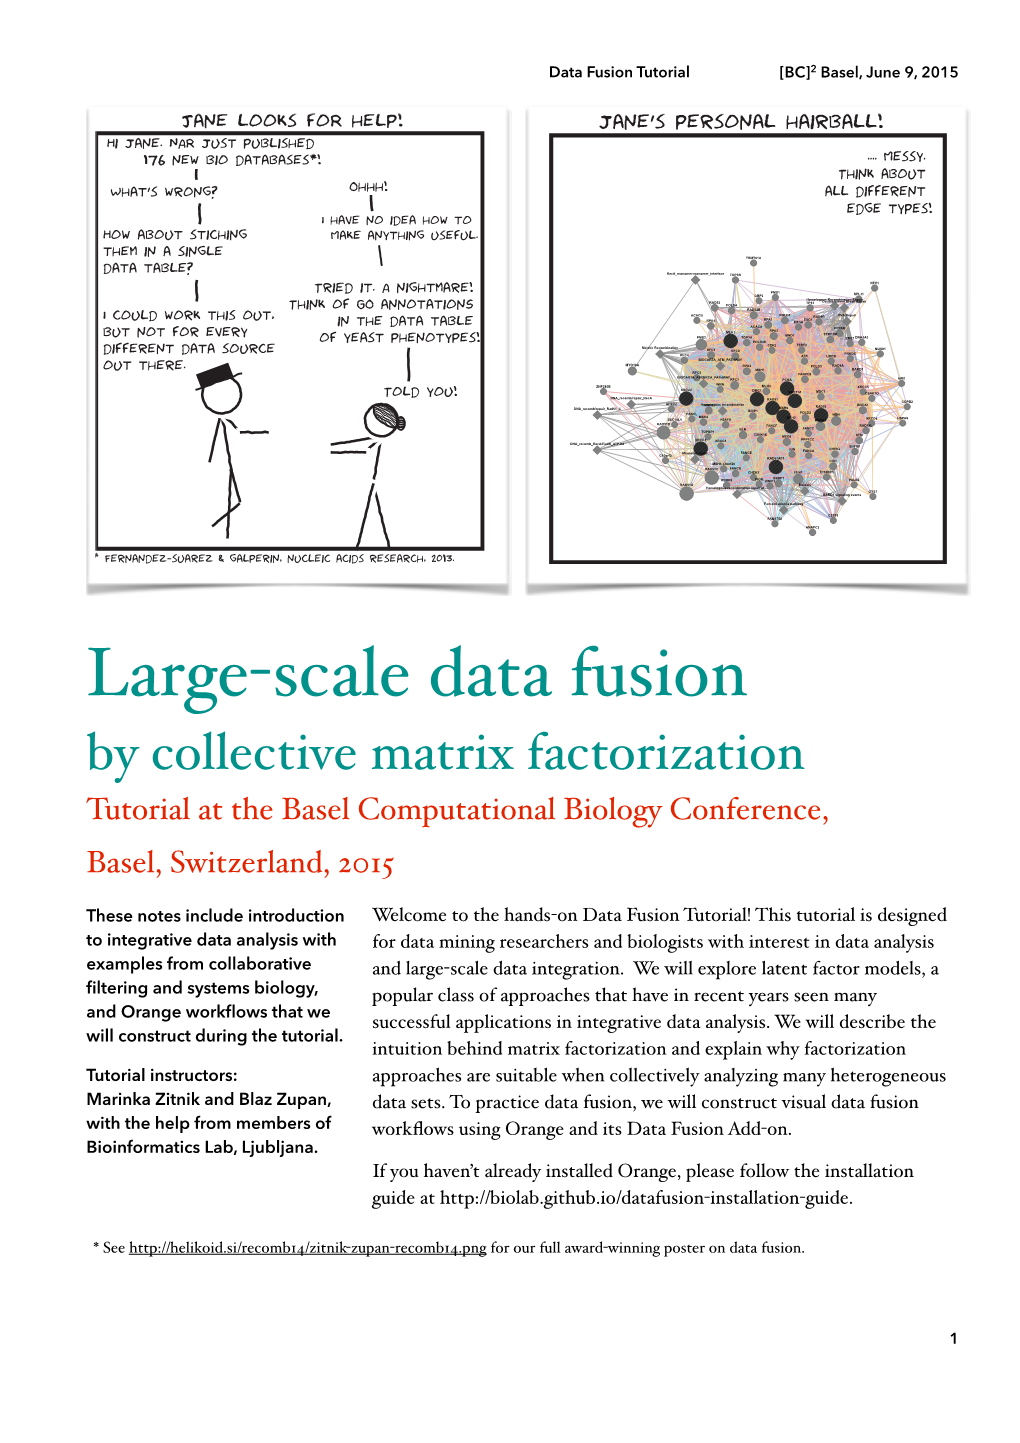 Large-Scale Data Fusion by Collective Matrix Factorization Tutorial at the Basel Computational Biology Conference, Basel, Switzerland, 2015